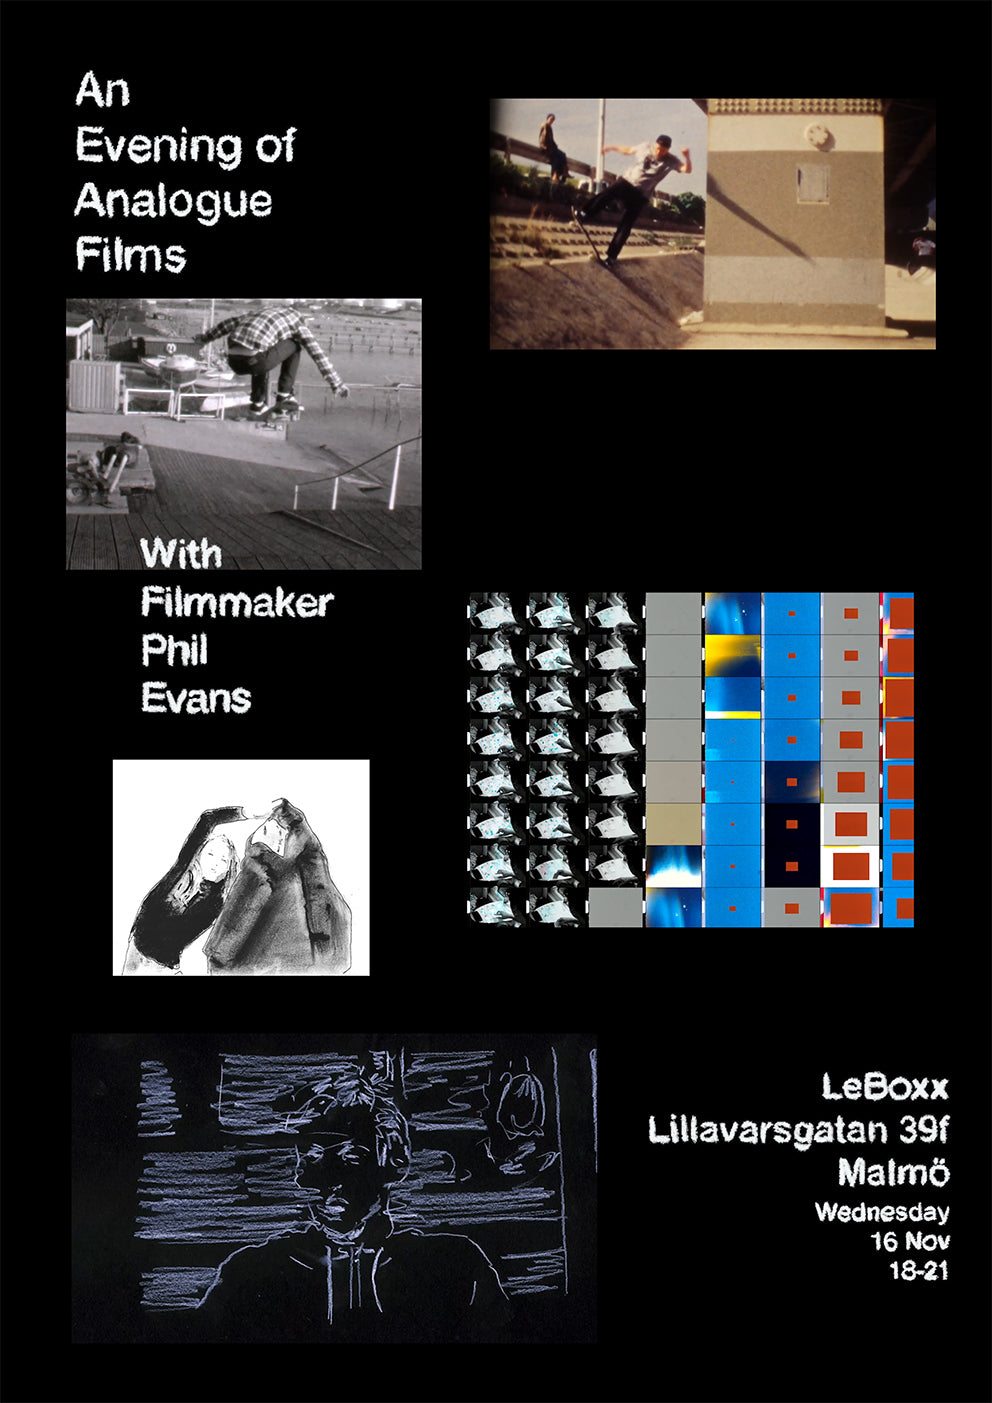 An evening of analogue films with filmmaker Phil Evans | 16 Nov